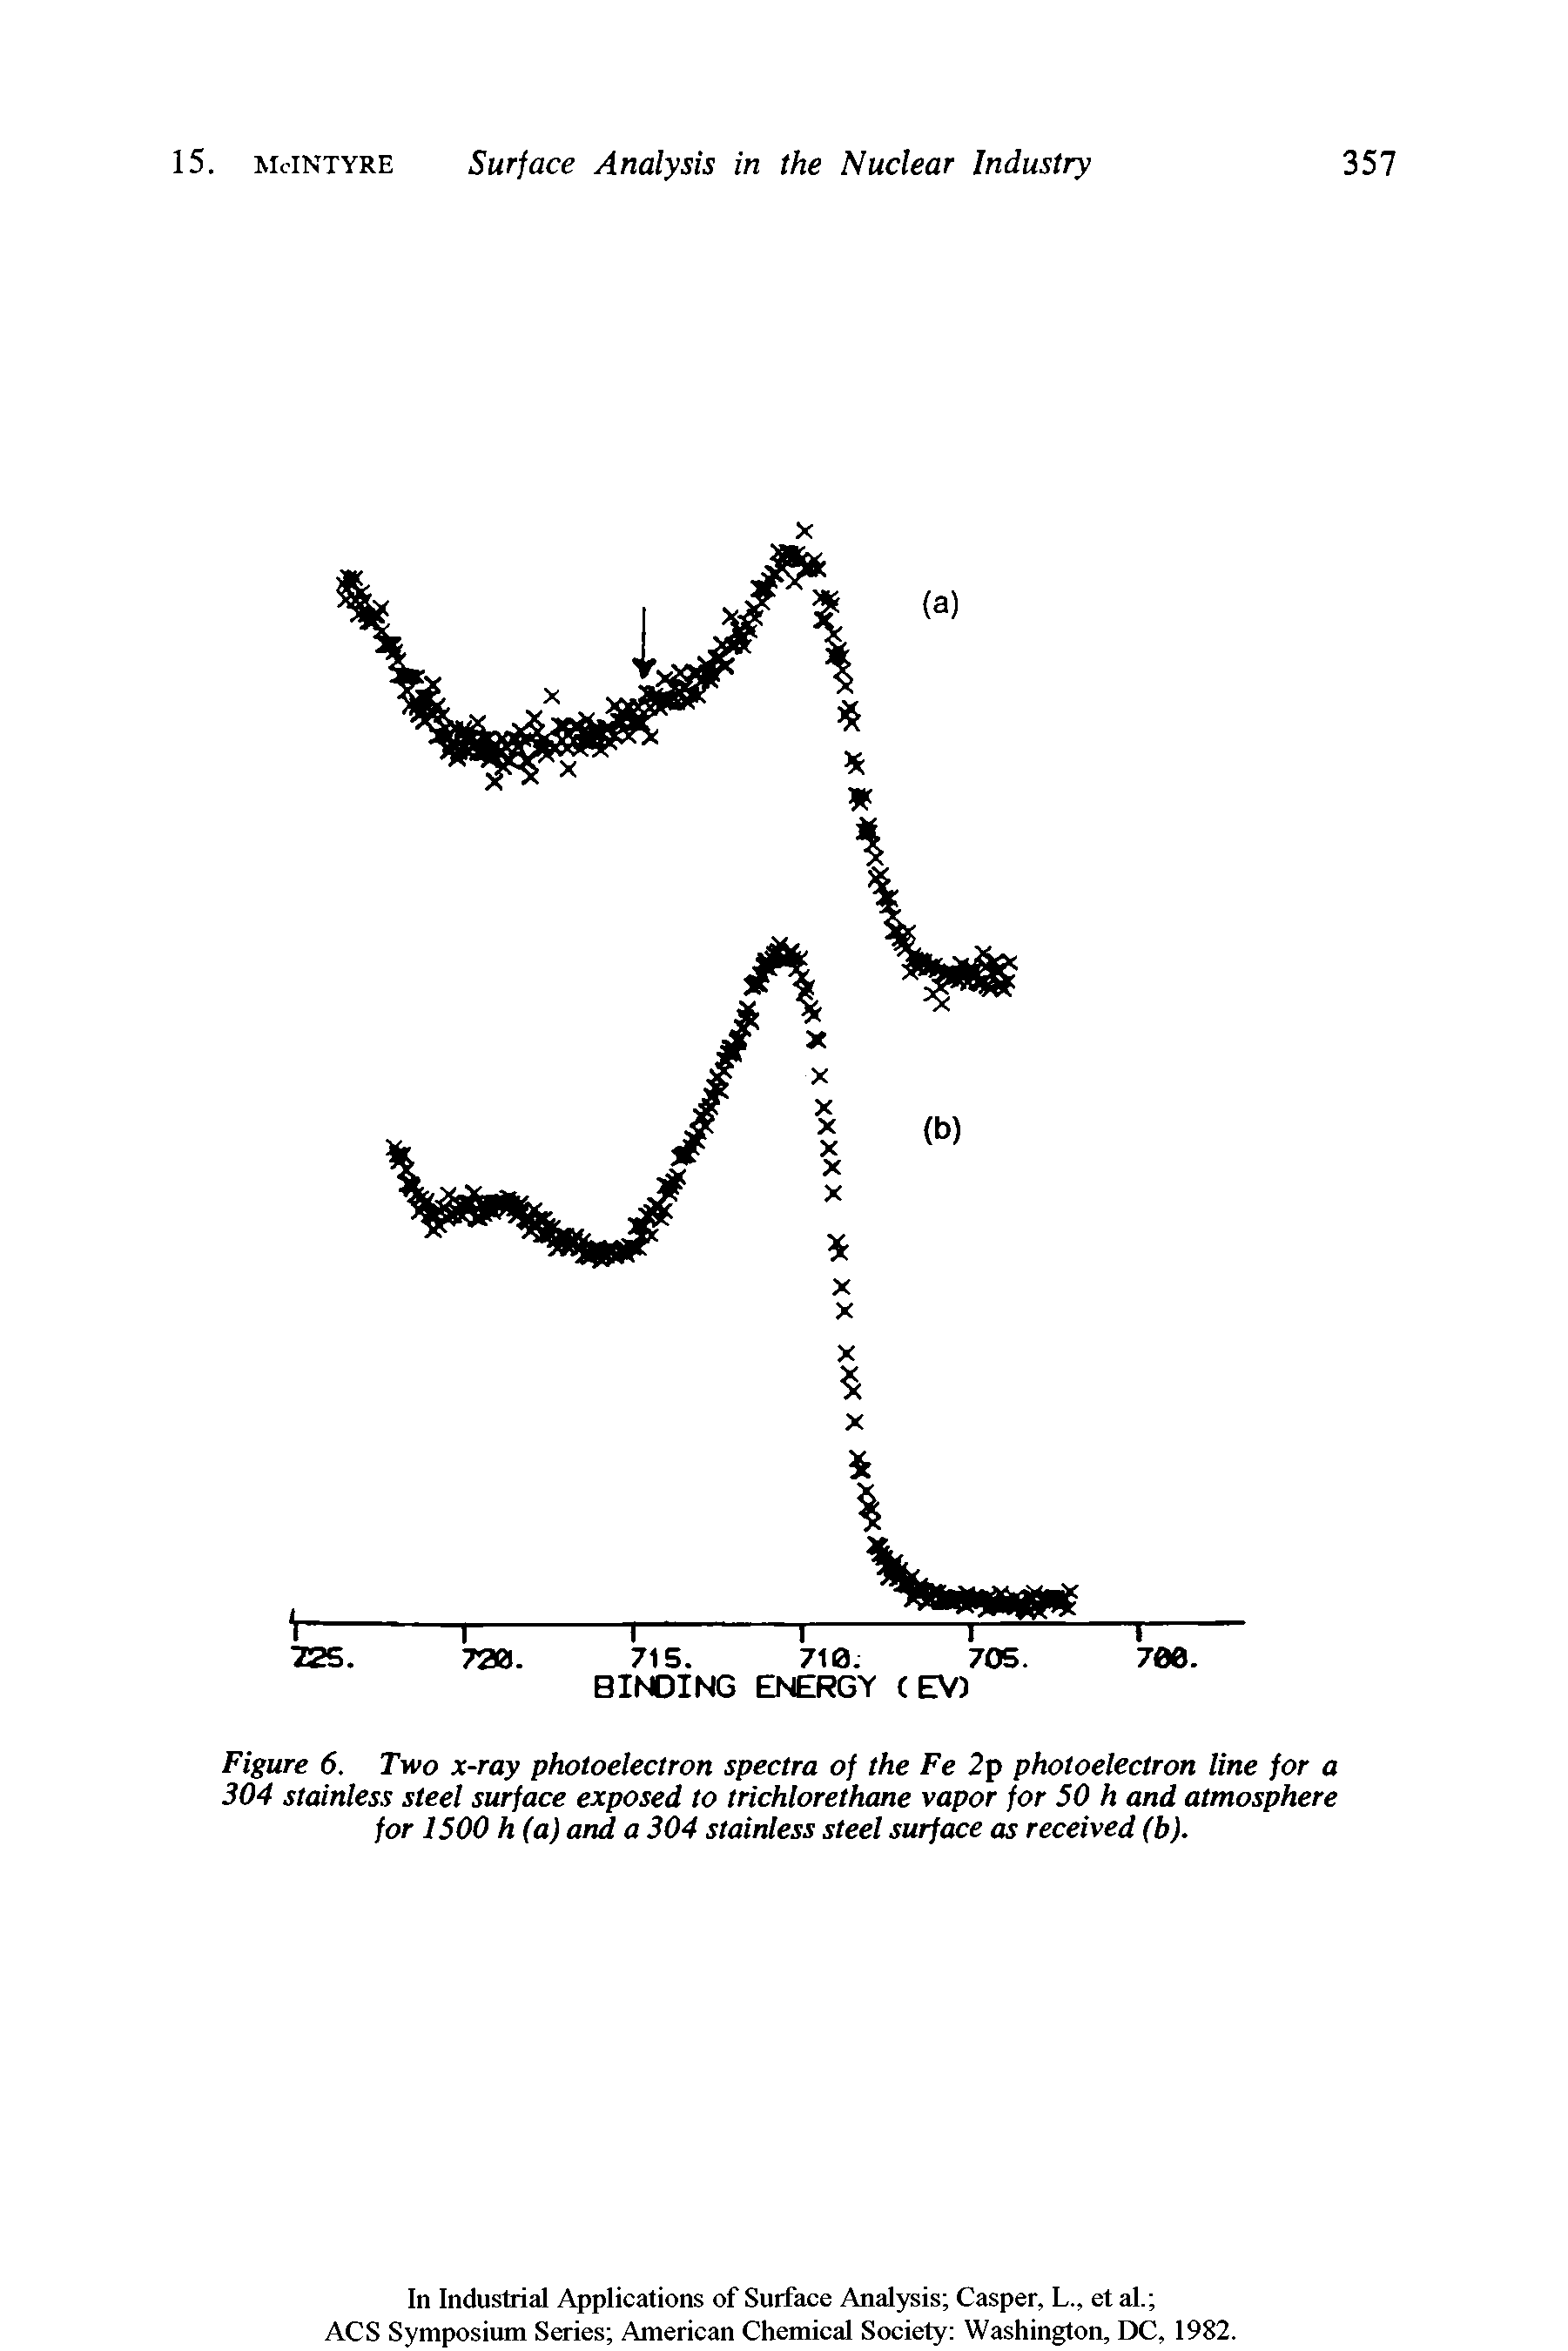 Figure 6. Two x-ray photoelectron spectra of the Fe 2p photoelectron line for a 304 stainless steel surface exposed to trichlorethane vapor for 50 h and atmosphere for 1500 h (a) and a 304 stainless steel surface as received (b).